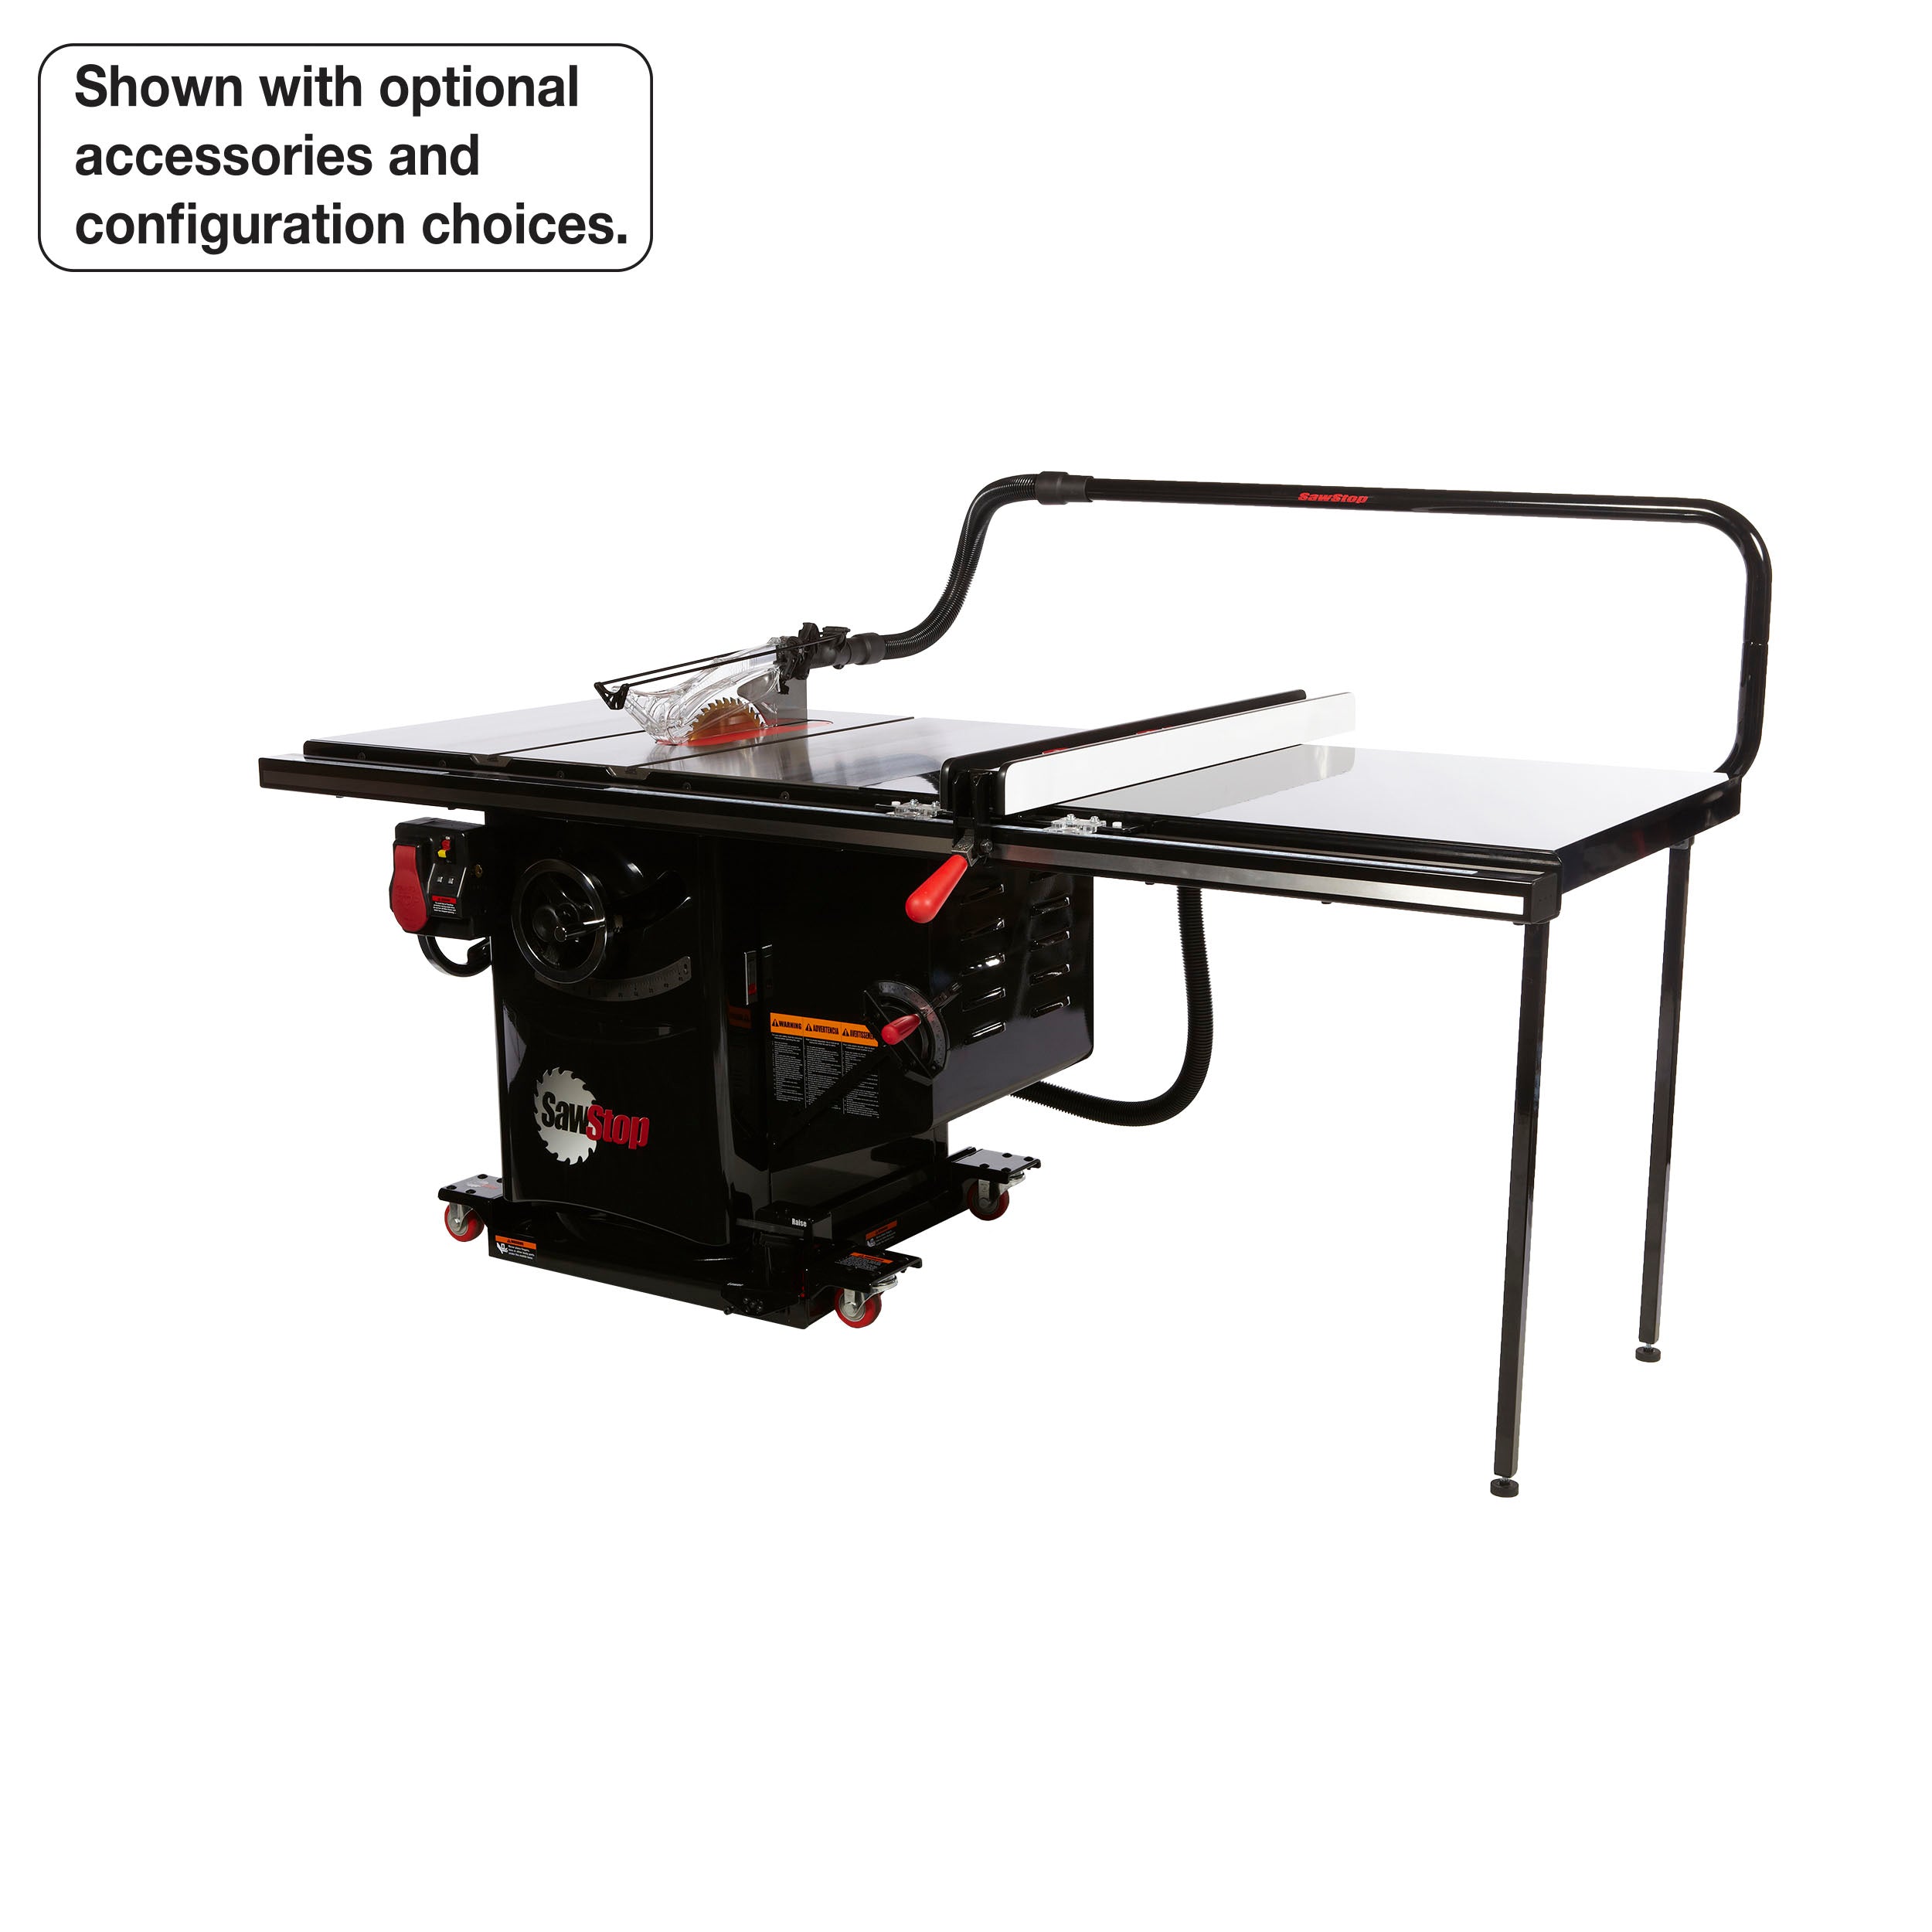 SawStop 5HP, 3ph, 230v Industrial Cabinet Saw w/ 52